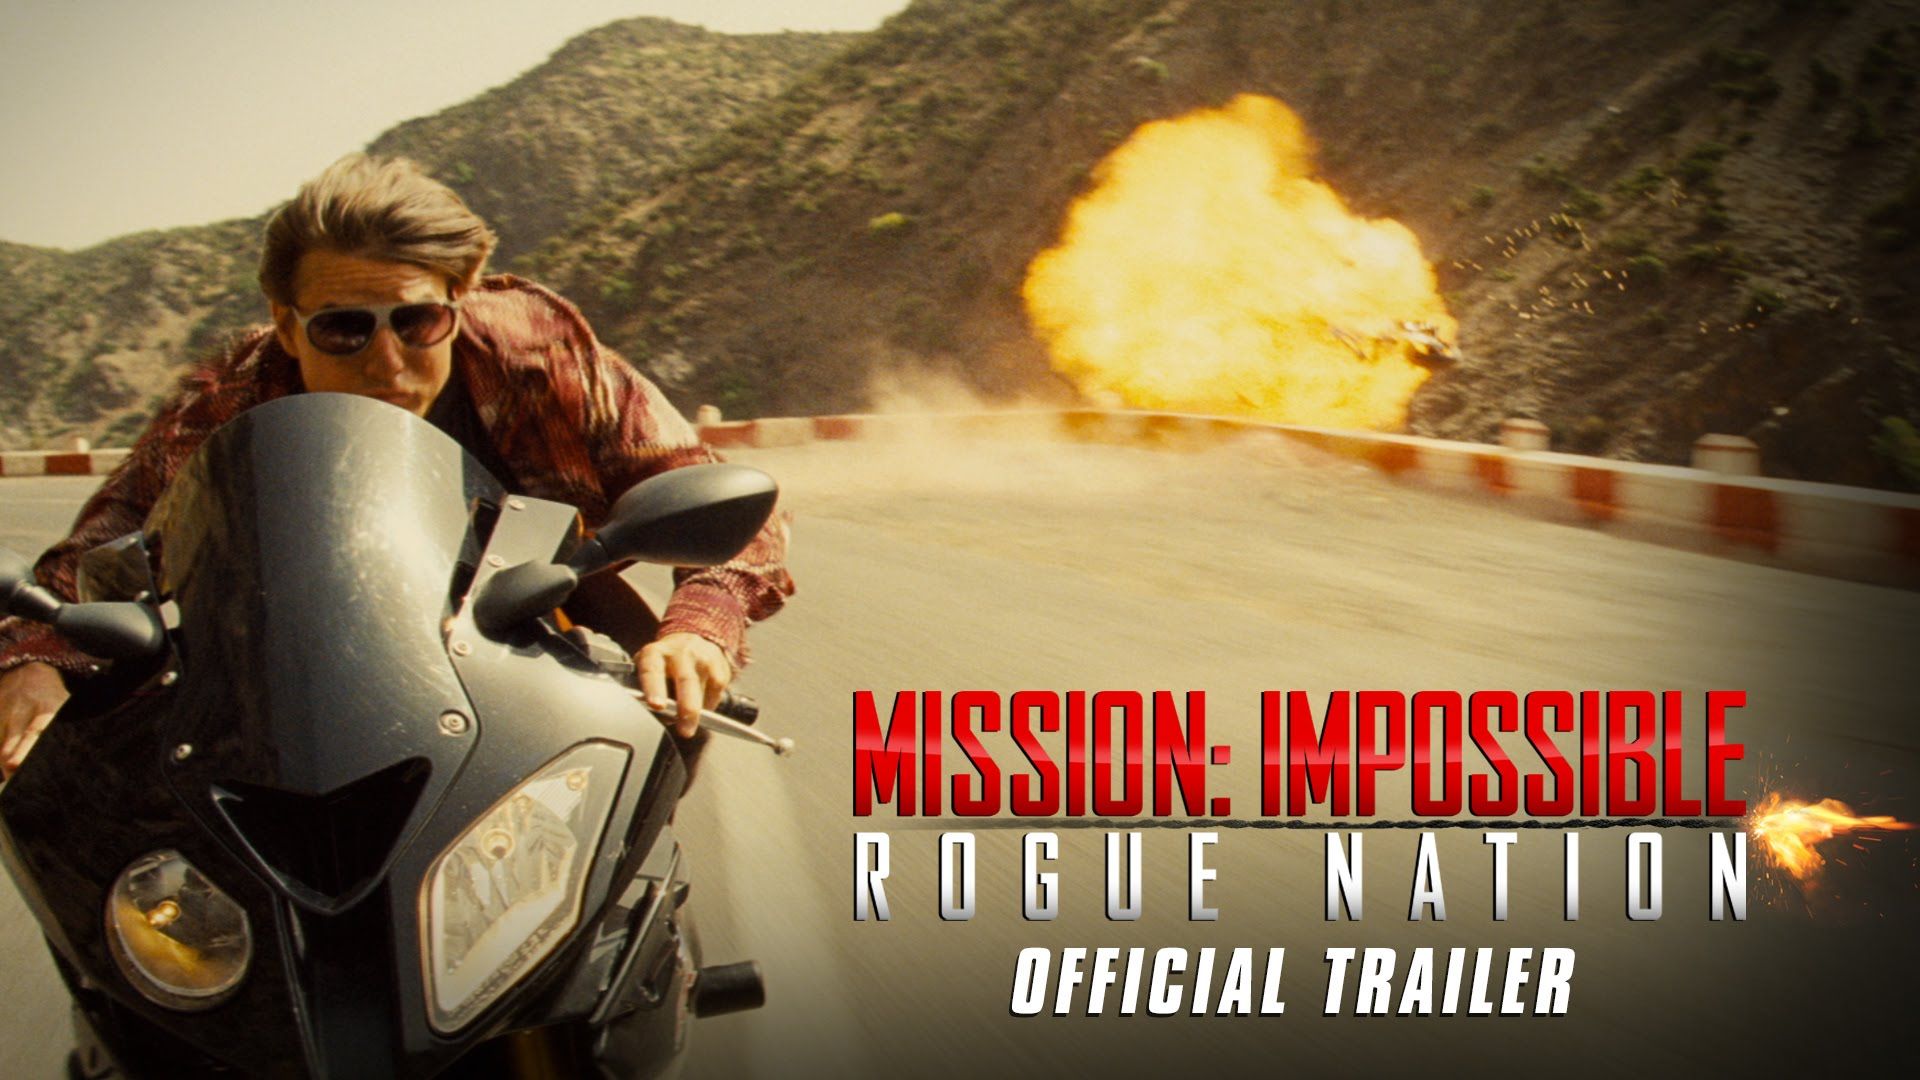 Mission: Impossible Nation wallpaper, Movie, HQ Mission: Impossible Nation pictureK Wallpaper 2019